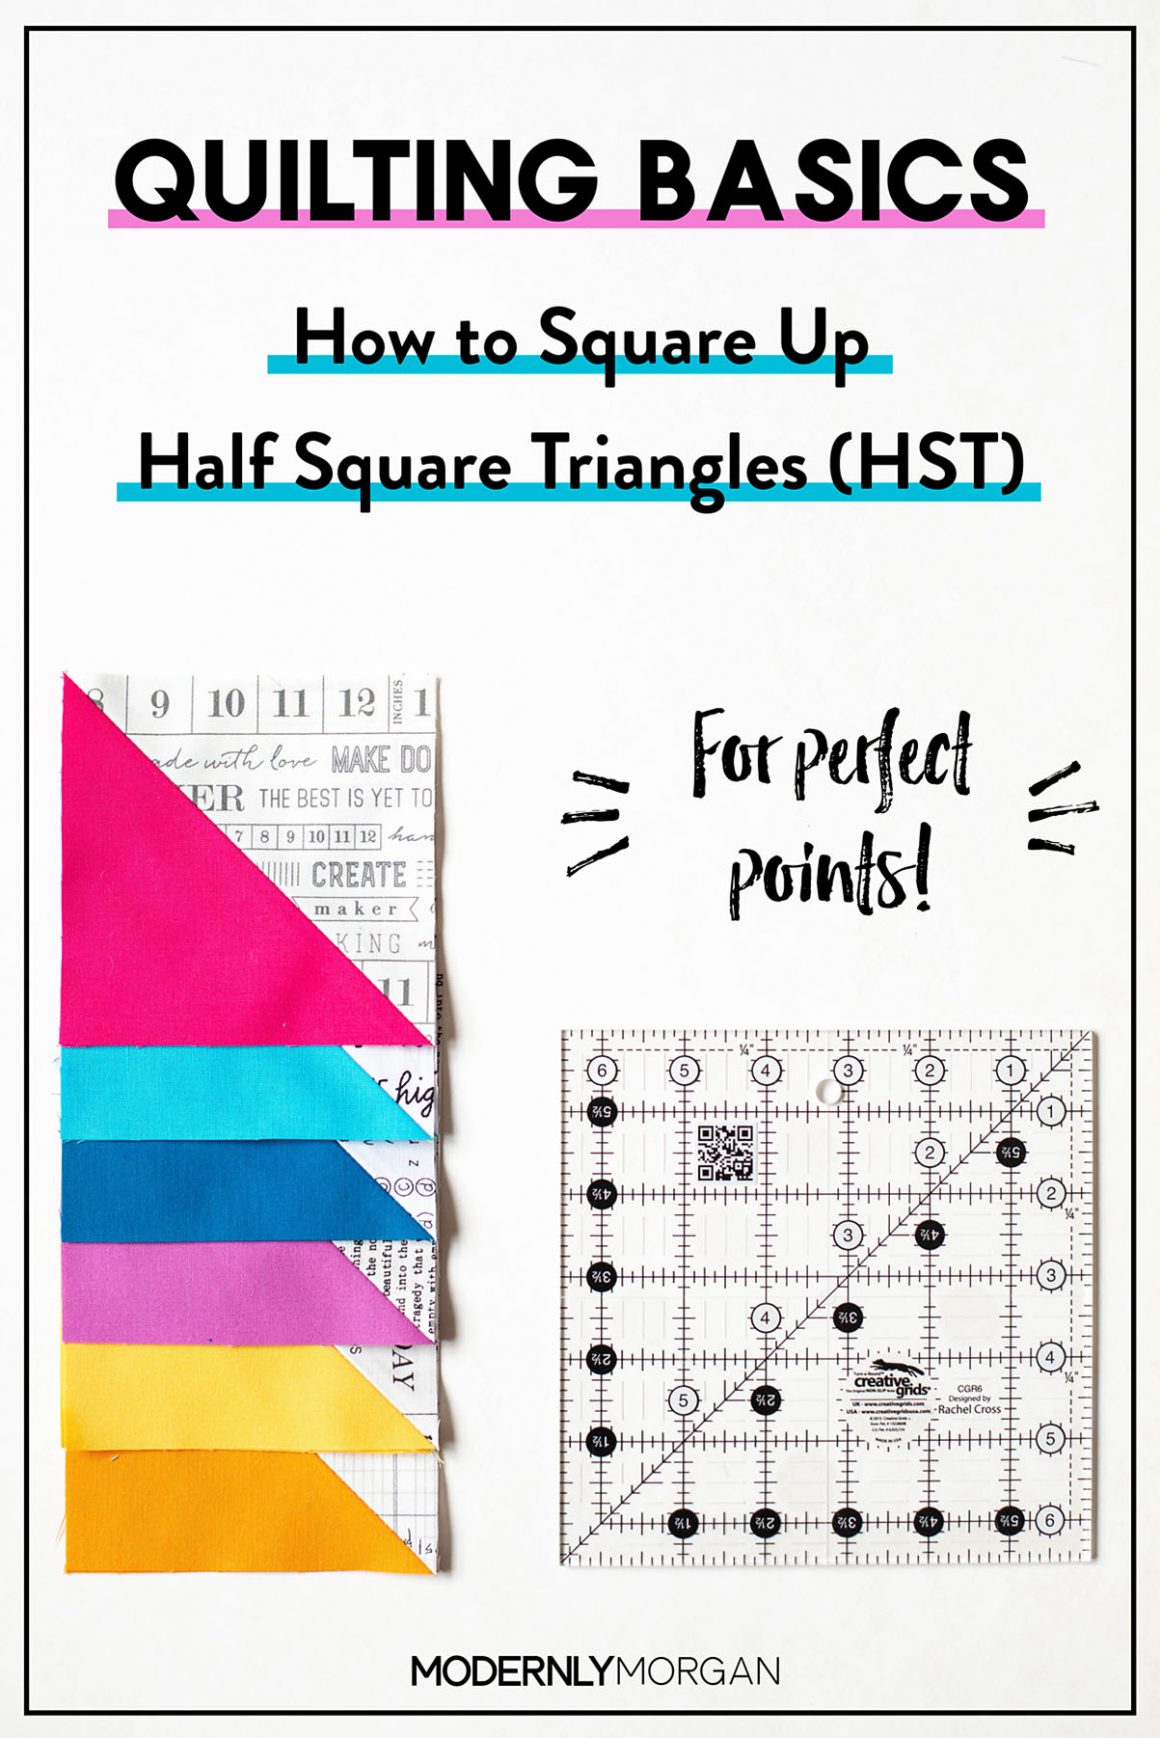 Quilting Basics: How to Square Up Half Square Triangles (HST) Tutorial for Perfect Points!